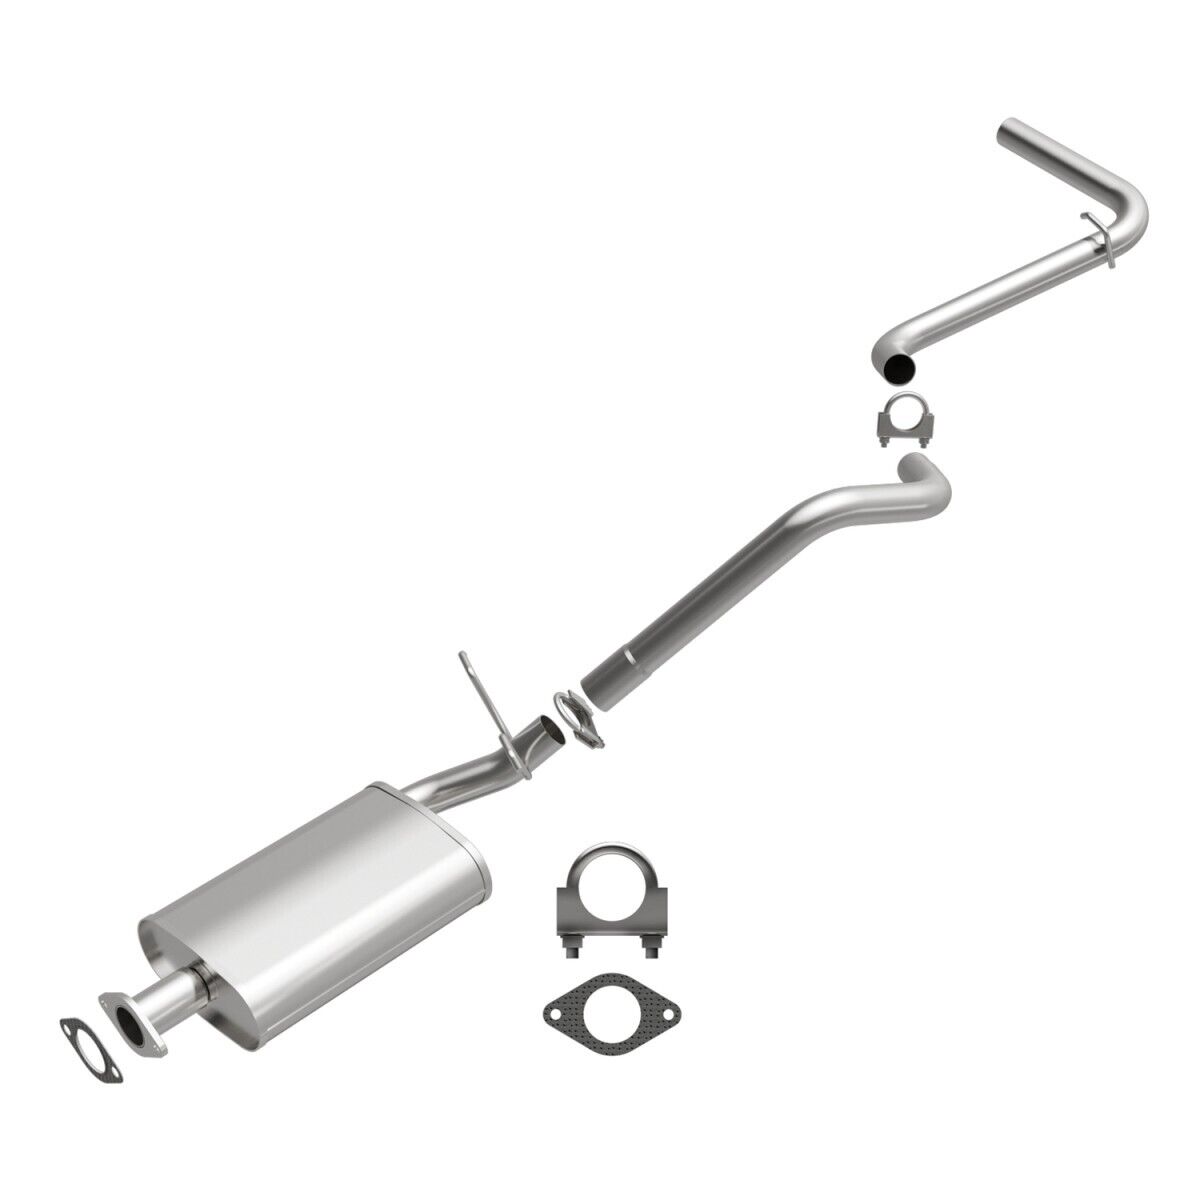 Open Box 106-0138 BRExhaust Exhaust System For Bronco Ford II 1986-1989